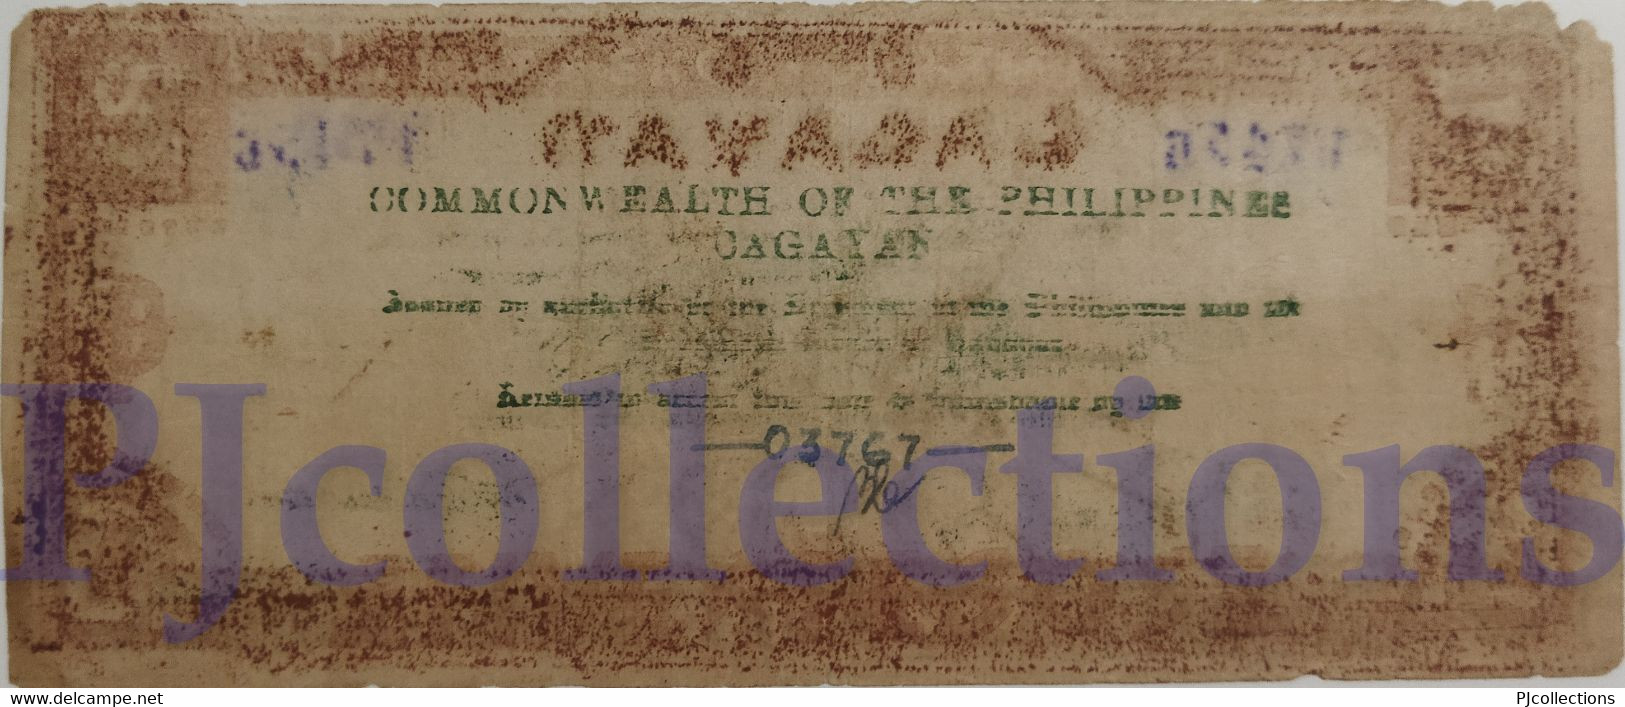 PHILIPPINES 5 PESOS 1944 PICK S191a FINE+ EMERGENCY BANKNOTE - Philippines